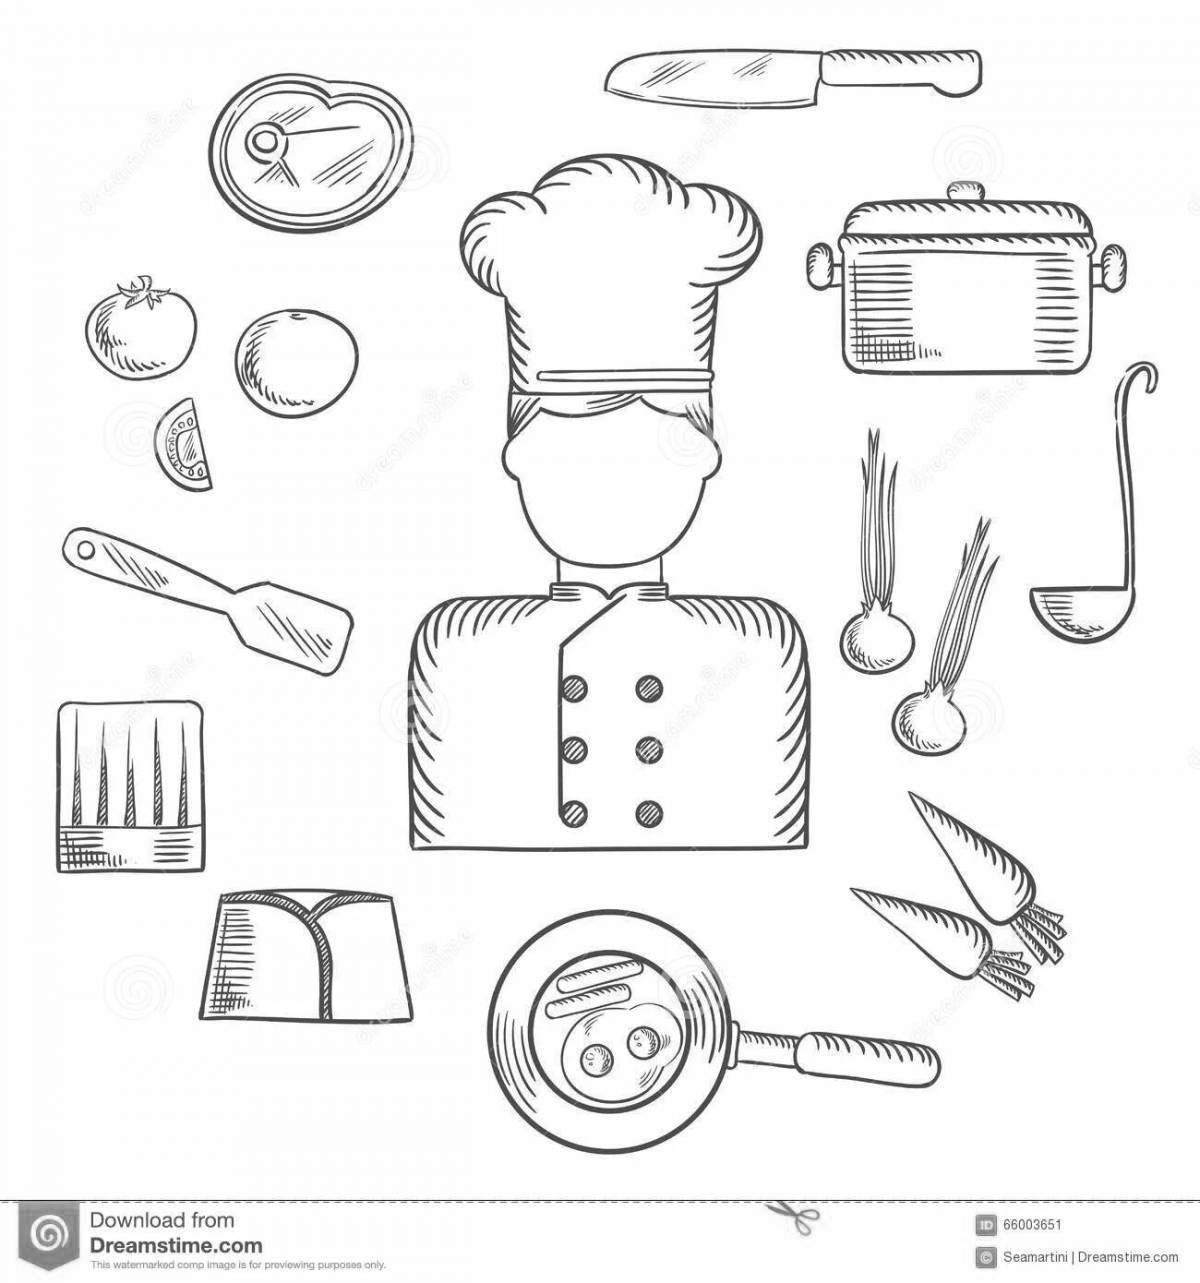 Exciting cook tools coloring page